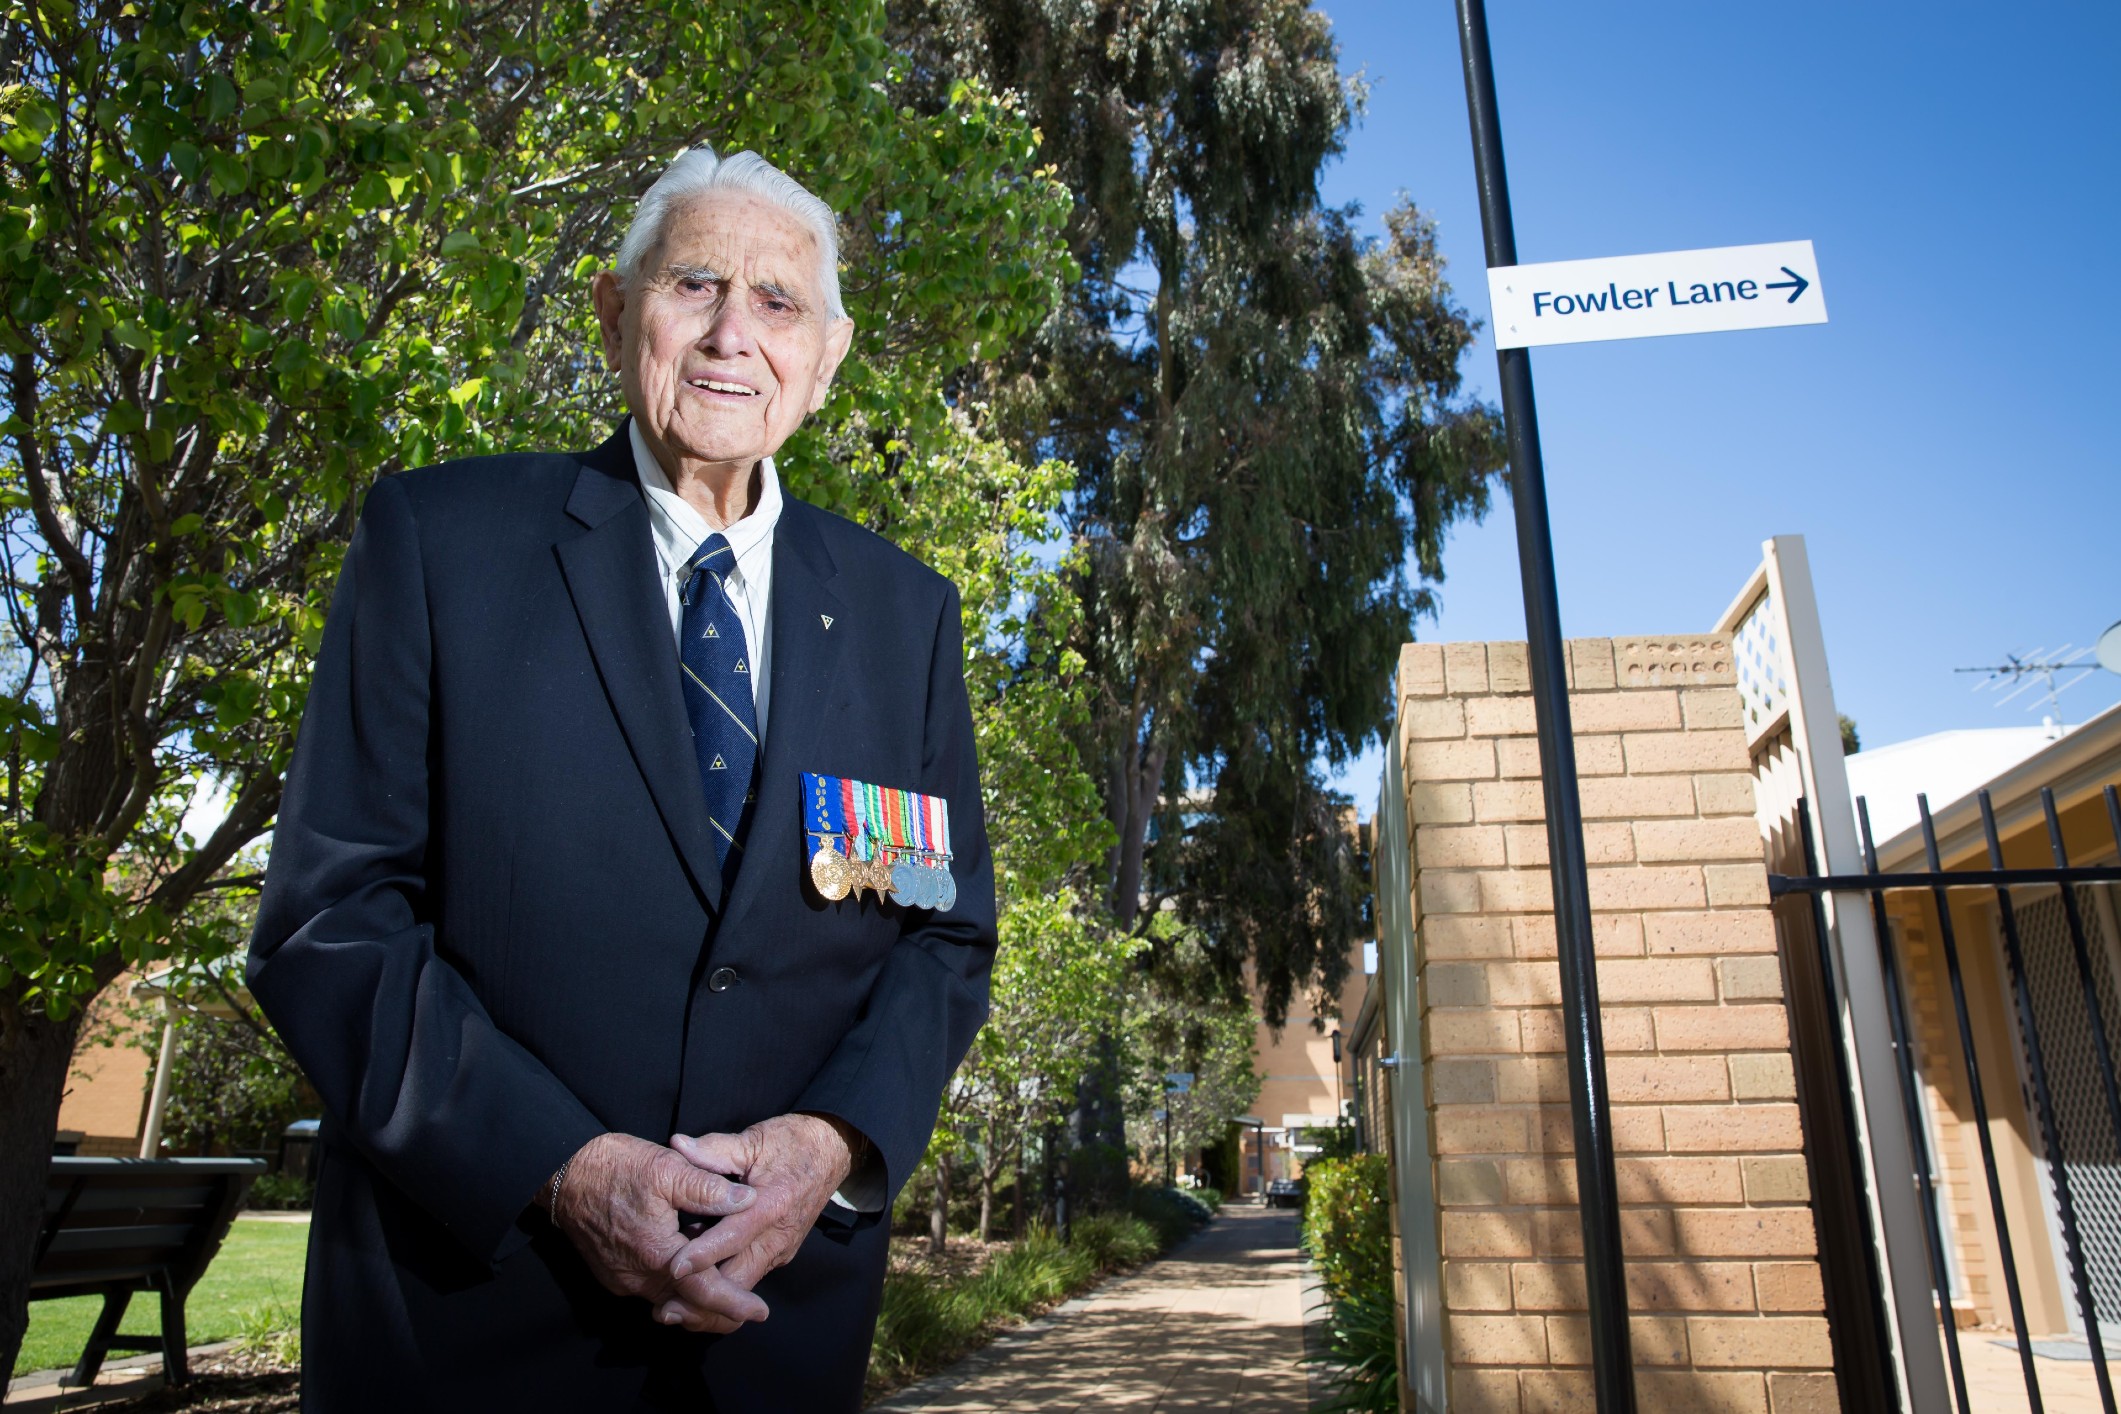 World War 2 veteran honoured with his own street name